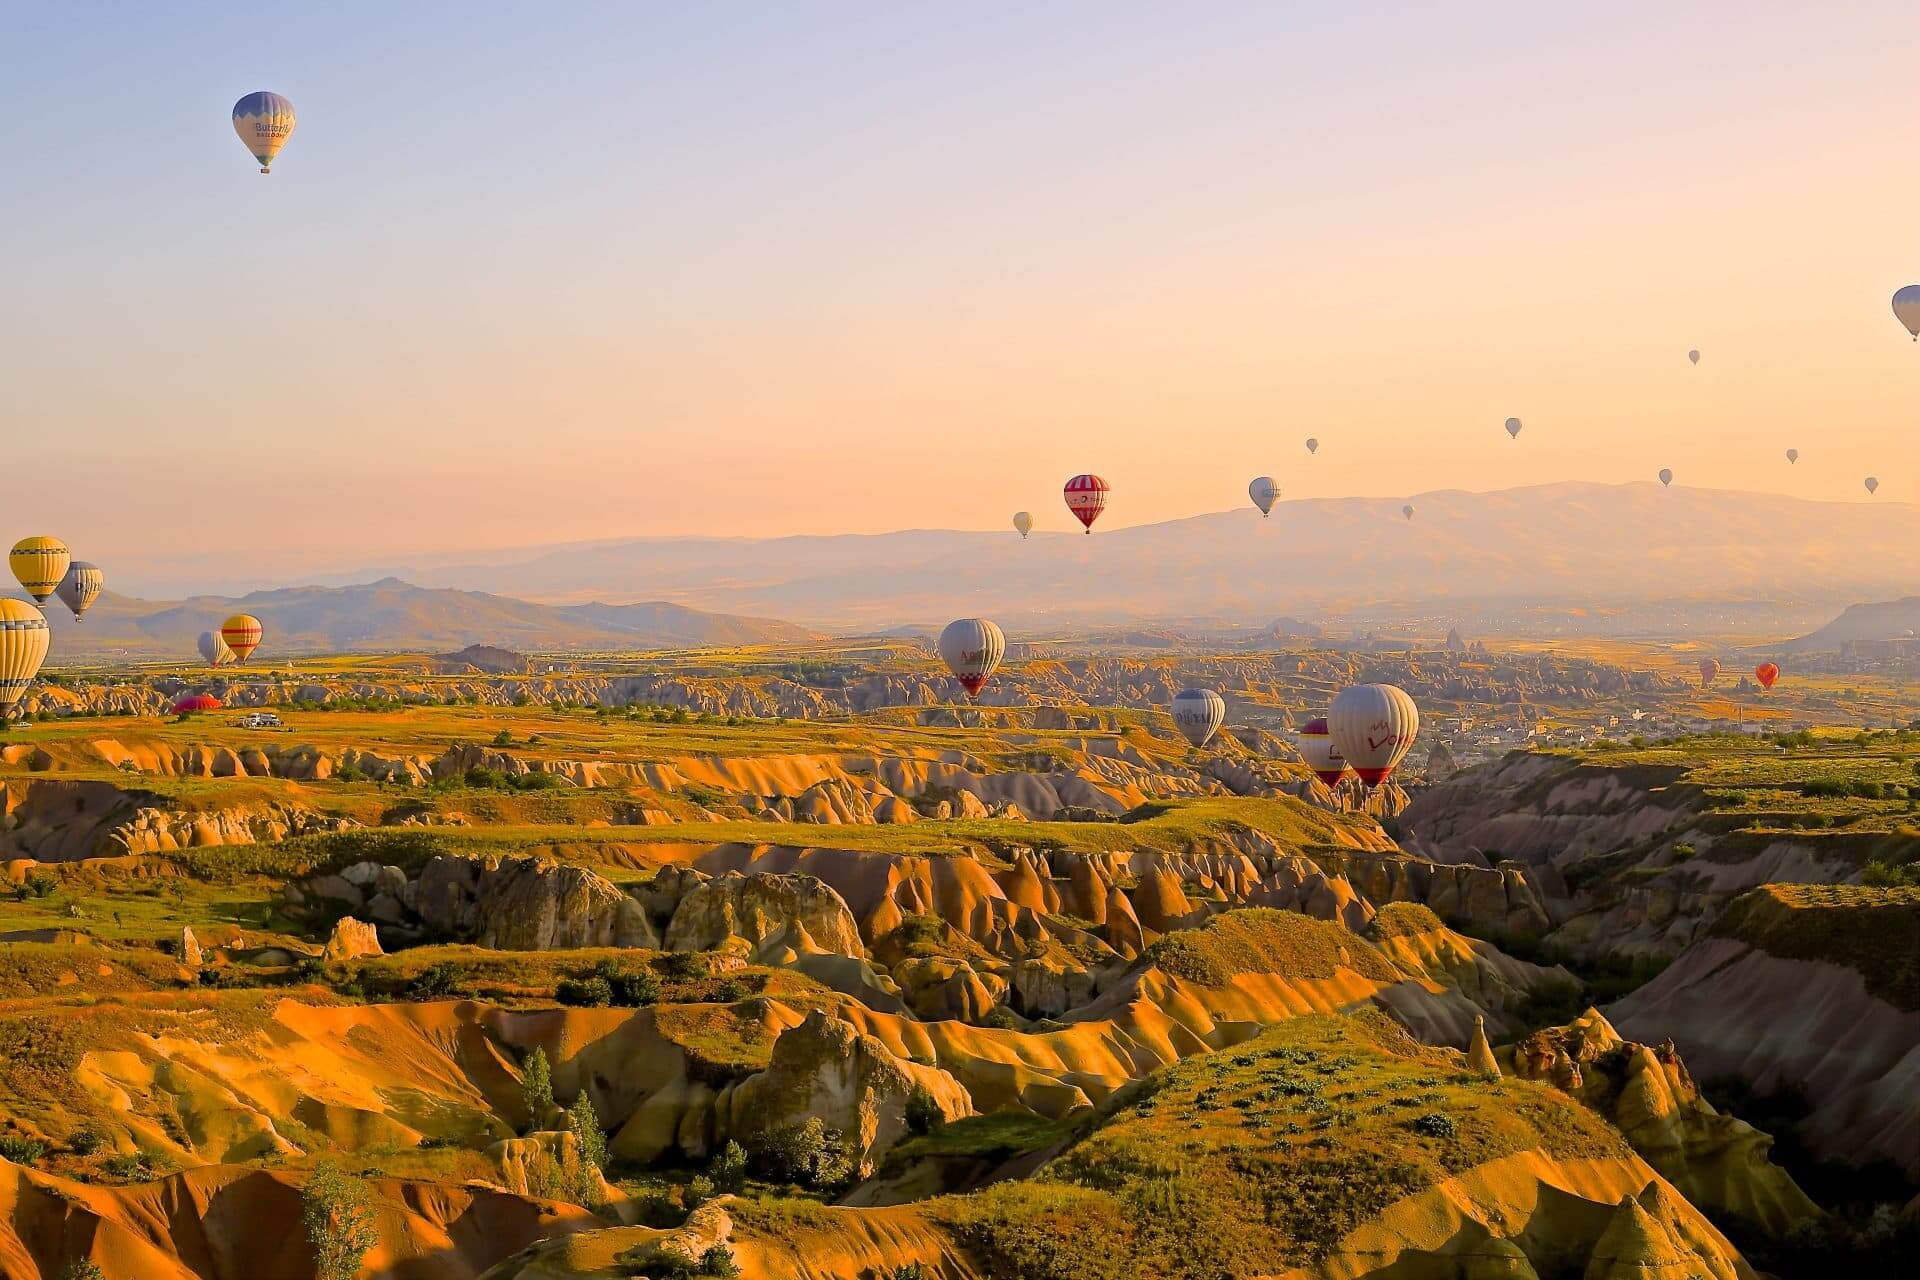 Air balloons in Turkey on a Jewish heritage tour of Turkey. They rise above green mountaintops and cliffs, illuminated by a bright orange sky,